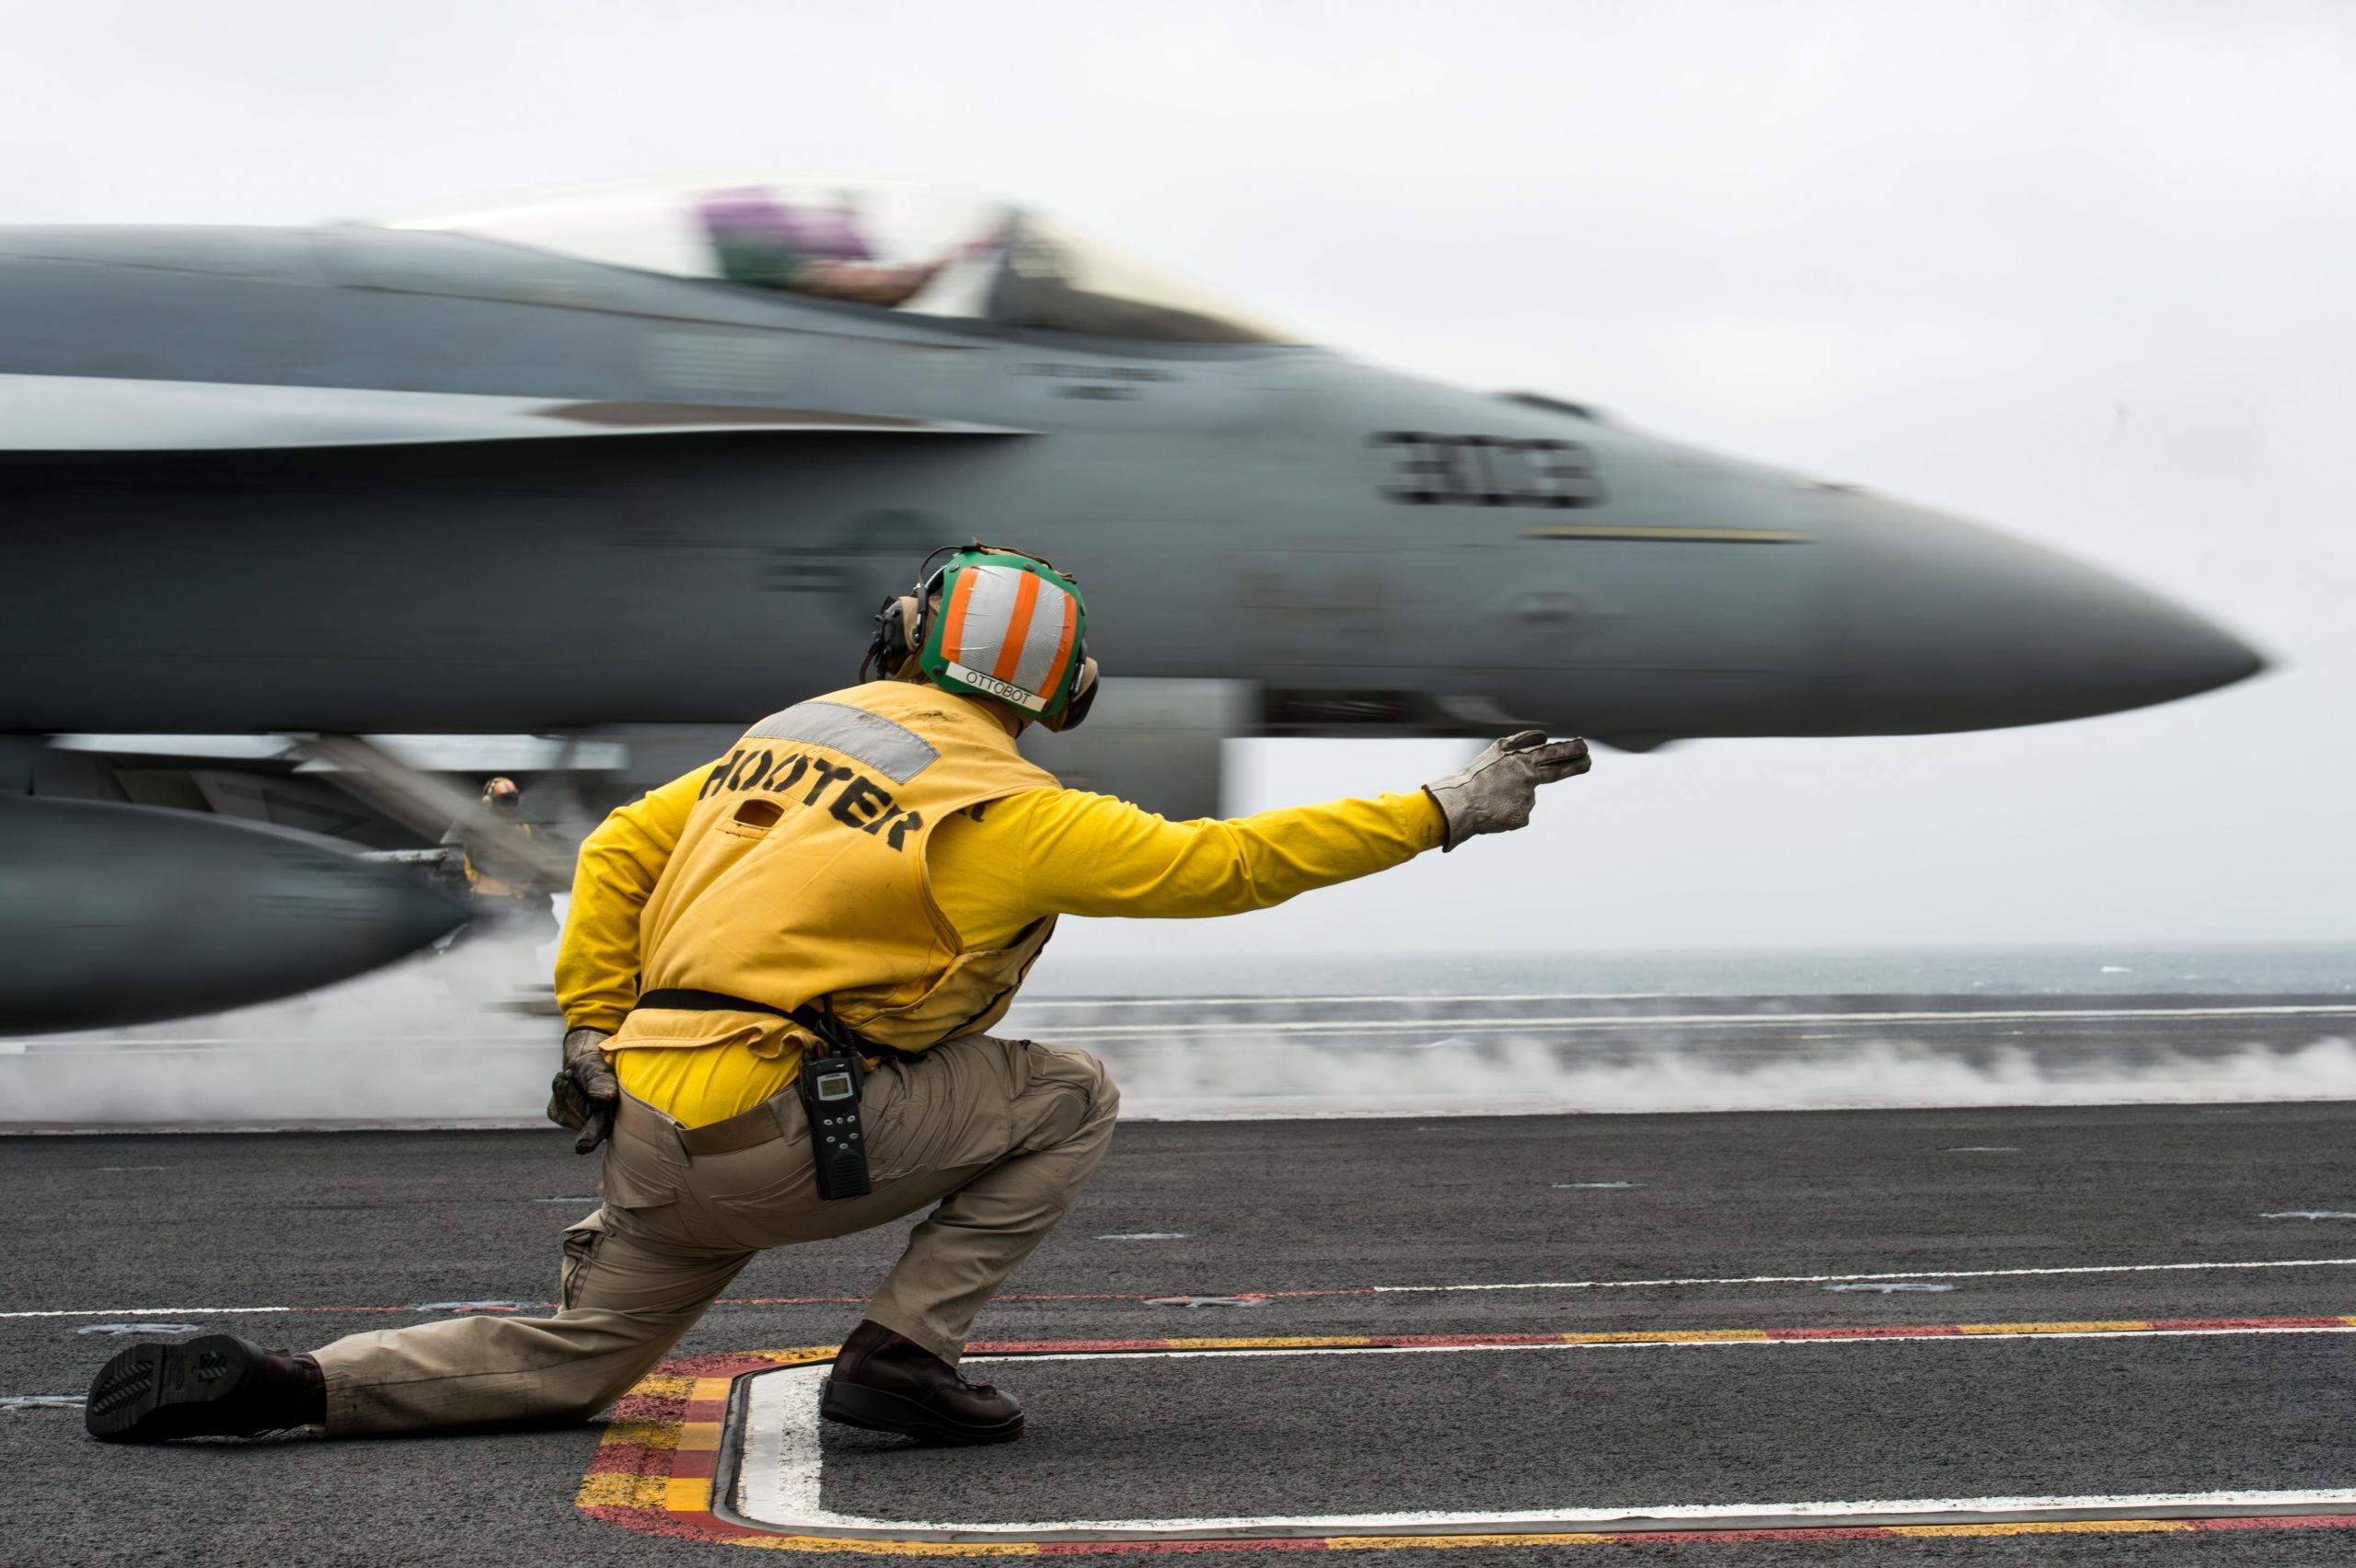 180426-N-VN584-2240 PACIFIC OCEAN (April 26, 2018) An F/A-18F Super Hornet assigned to the Mighty Shrikes of Strike Fighter Attack Squadron (VFA) 94 launches from the aircraft carrier USS Theodore Roosevelt (CVN 71). Theodore Roosevelt is underway on a regularly scheduled deployment in the western Pacific. U.S. Navy photo by Mass Communication Specialist 3rd Class Alex Corona. -